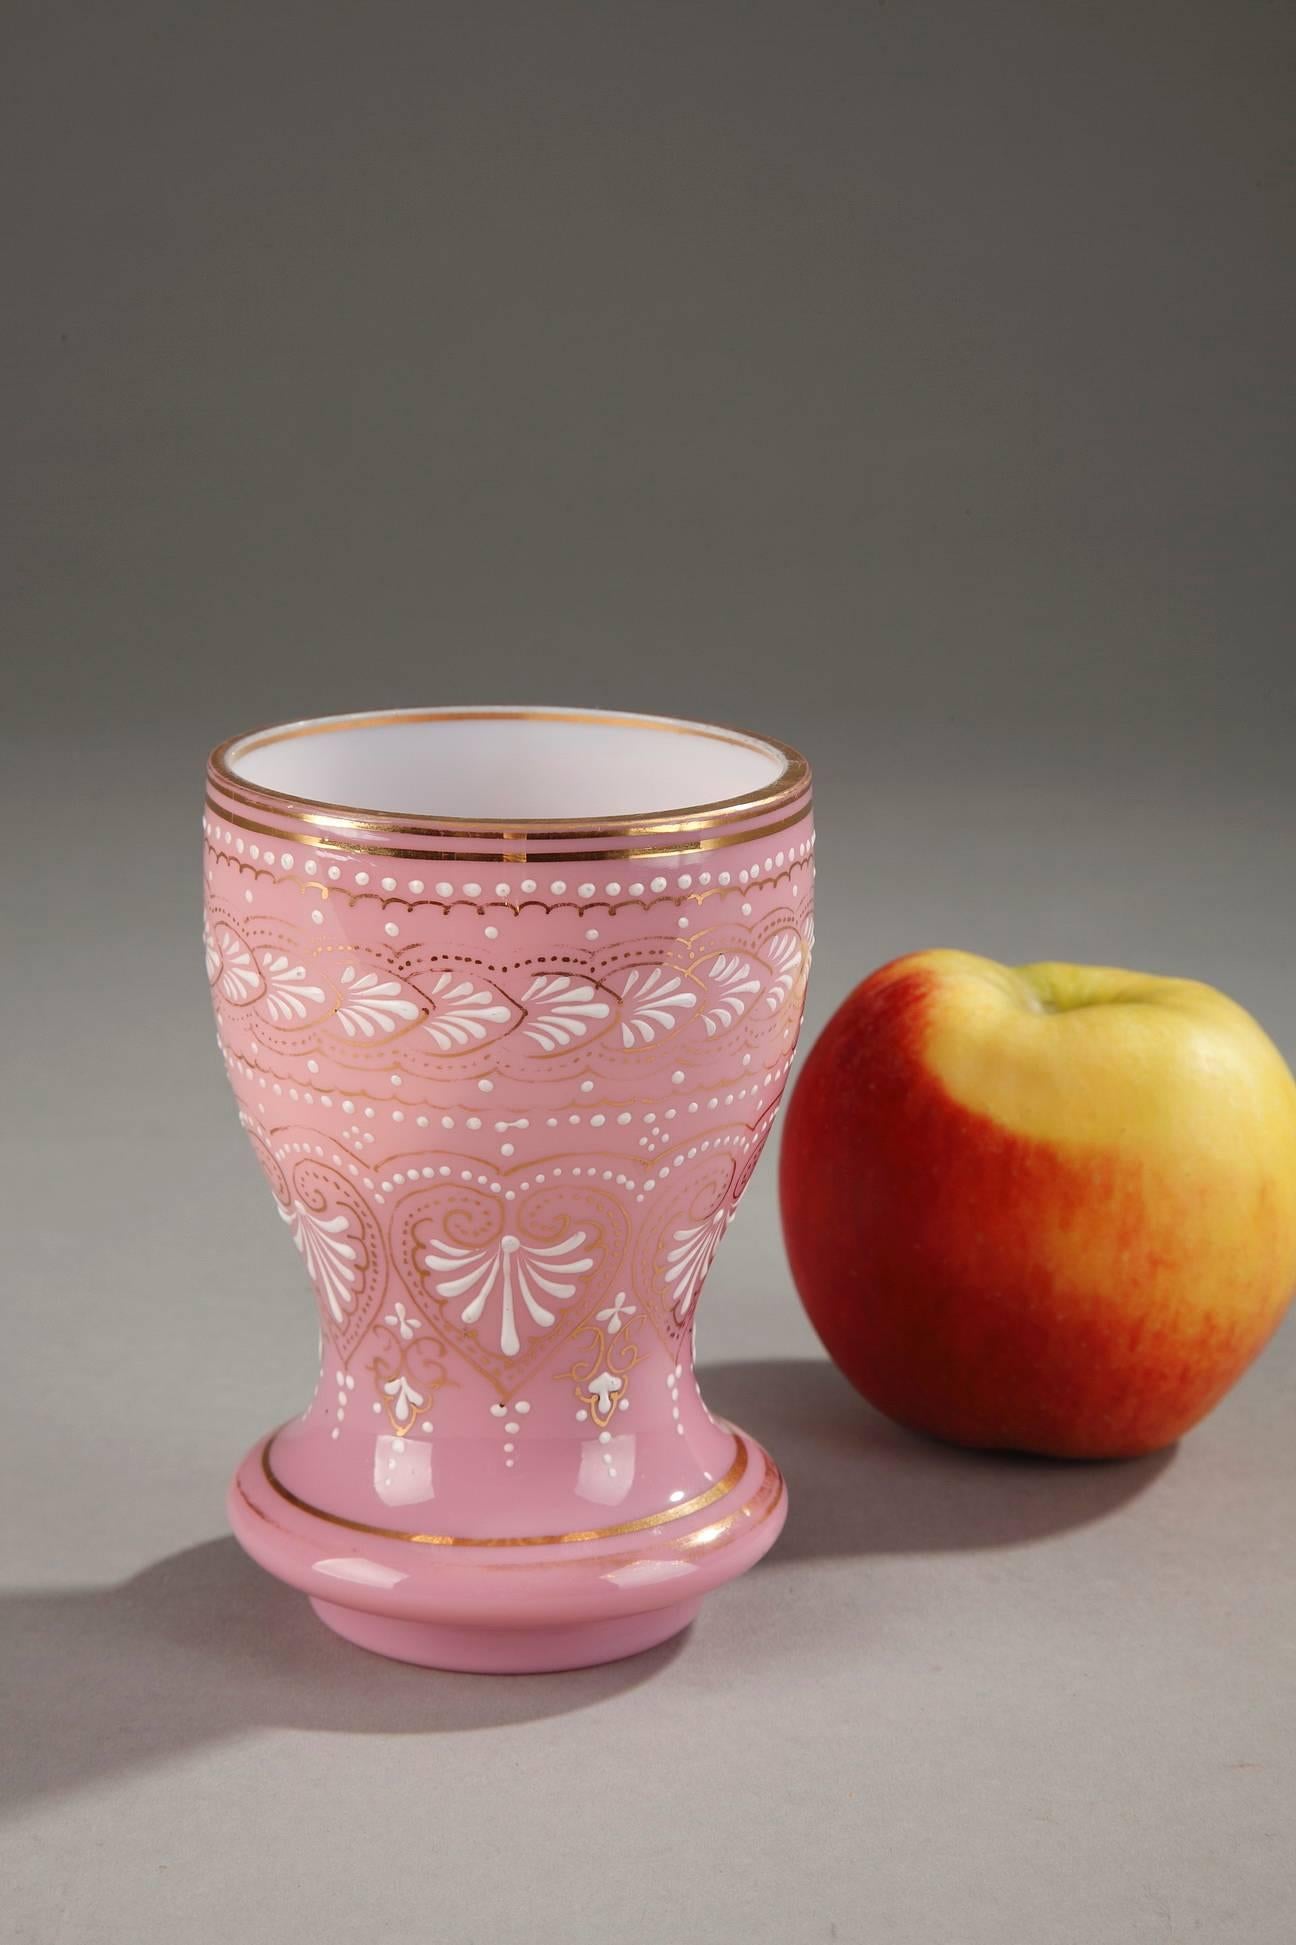 19th century cup crafted in pink opaline glass, embellished with palmettes, small pearls, and foliate motifs in white enamel. Thin bands of gold highlight the enamel as well as the base and rim of the cup. The precise and detailed enamel work